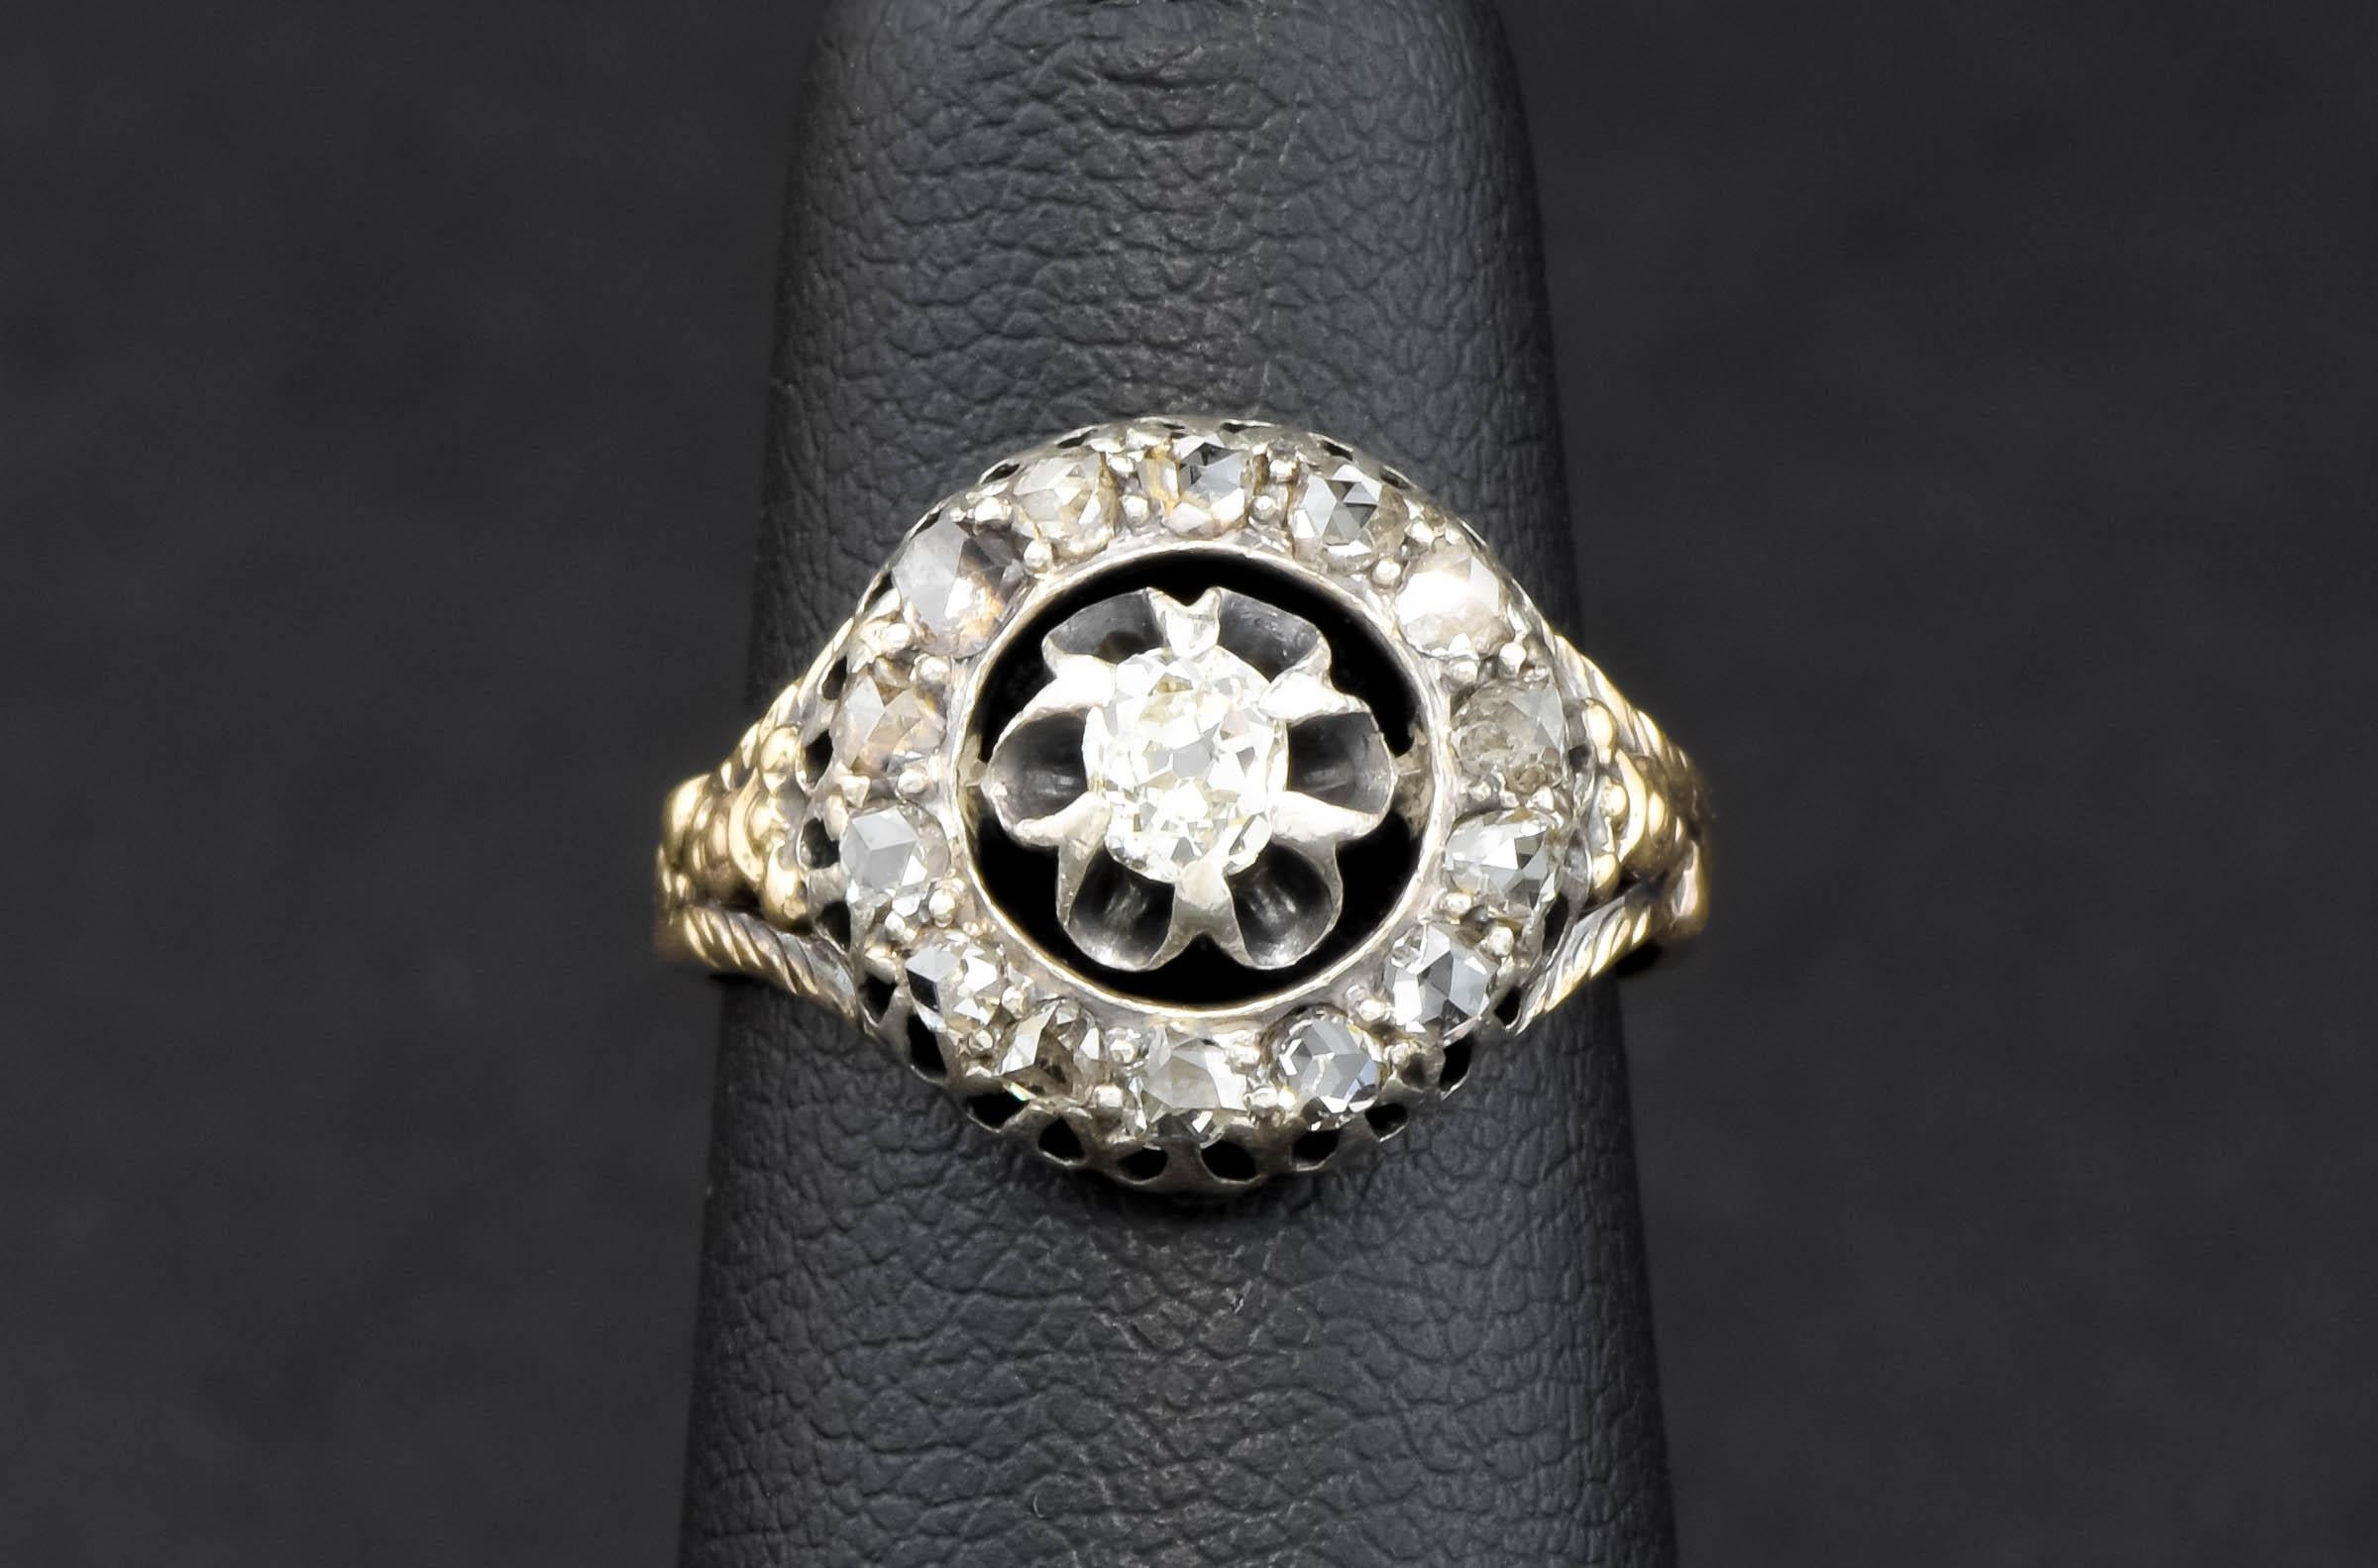 A very charming Late Georgian/early Victorian style Diamond Halo Ring - this ring is almost certainly vintage and made in Europe with antique diamonds. The style and detail is wonderful, despite it not being all antique. It will arrive in a period